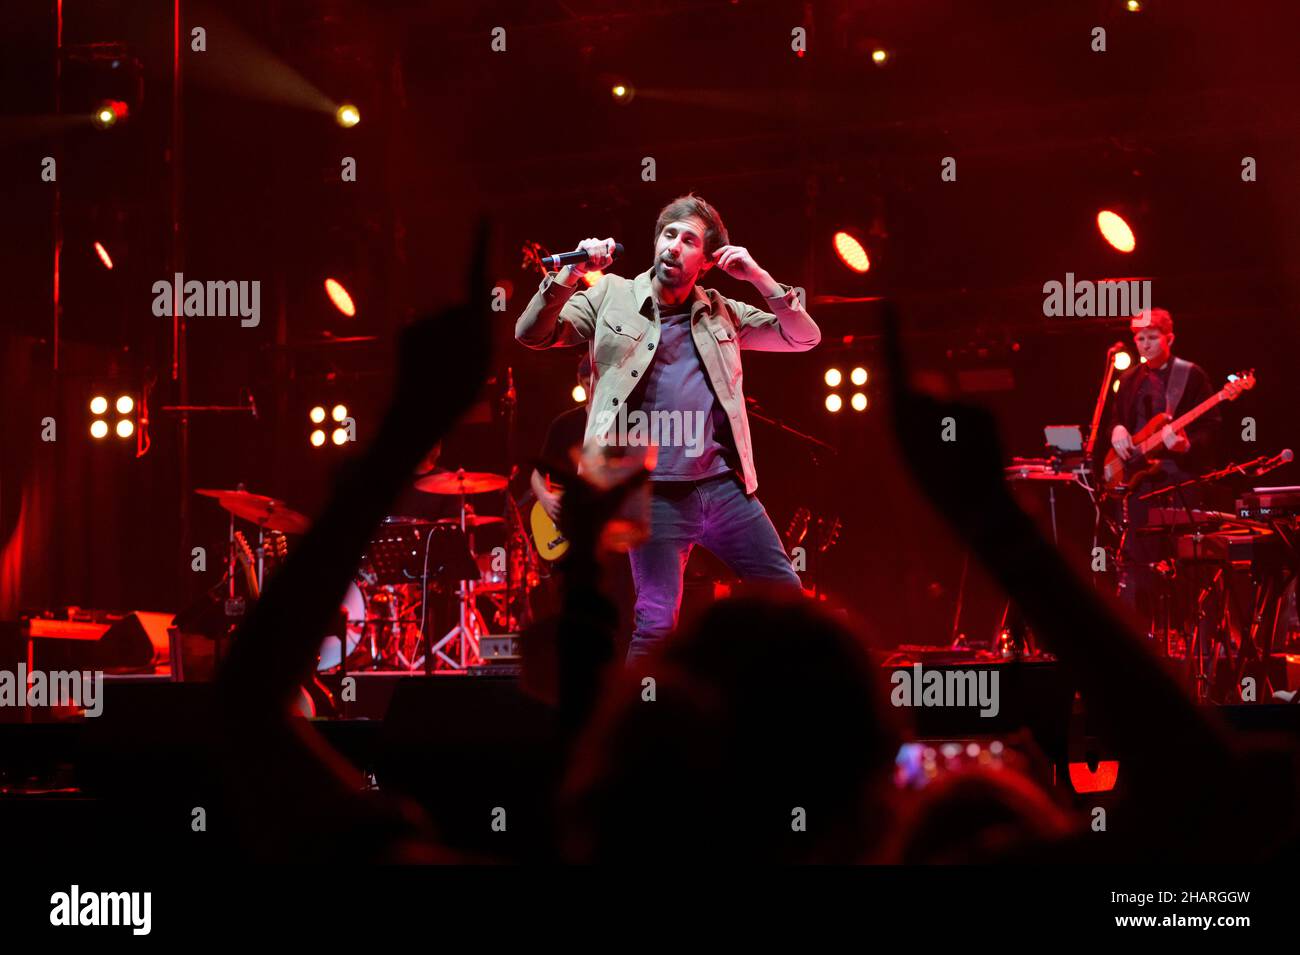 Hamburg, Germany. 14th Dec, 2021. Singer Max Giesinger sings in front of dancing fans on stage. Numerous well-known musicians and up-and-coming artists rocked the stage of Hamburg's Barclays Arena - but most of their audience was not sitting in the stands, but in front of the screens. The donation streaming concert of the 'AllHandsOnDeck' project was intended to raise as much money as possible for the benefit of concert staff and artists whose livelihoods are at risk. Credit: Jonas Walzberg/dpa/Alamy Live News Stock Photo